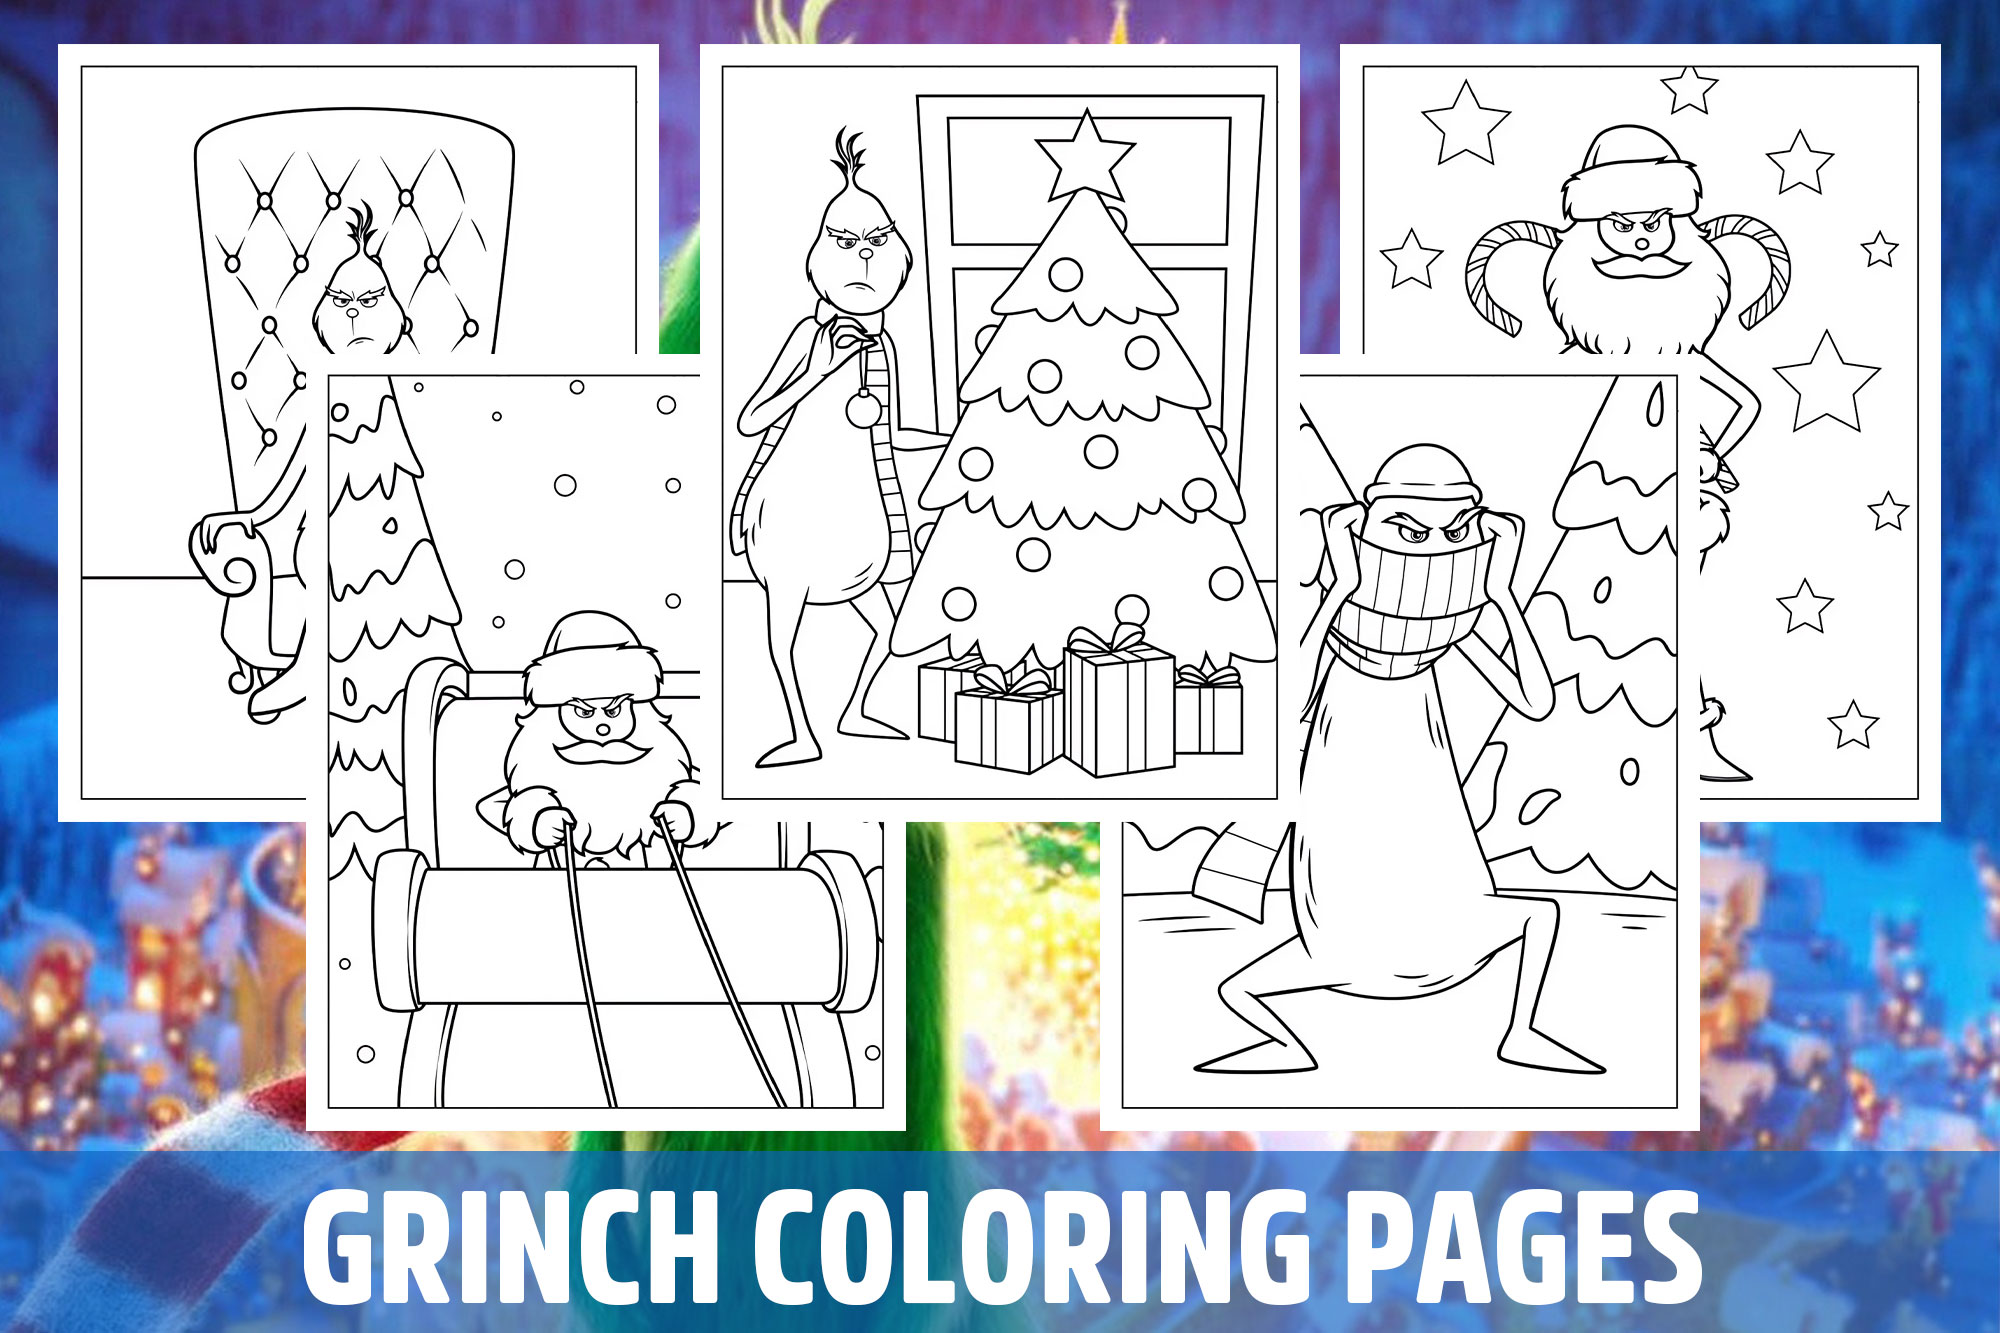 Grinch coloring pages for kids girls boys teens birthday school activity made by teachers